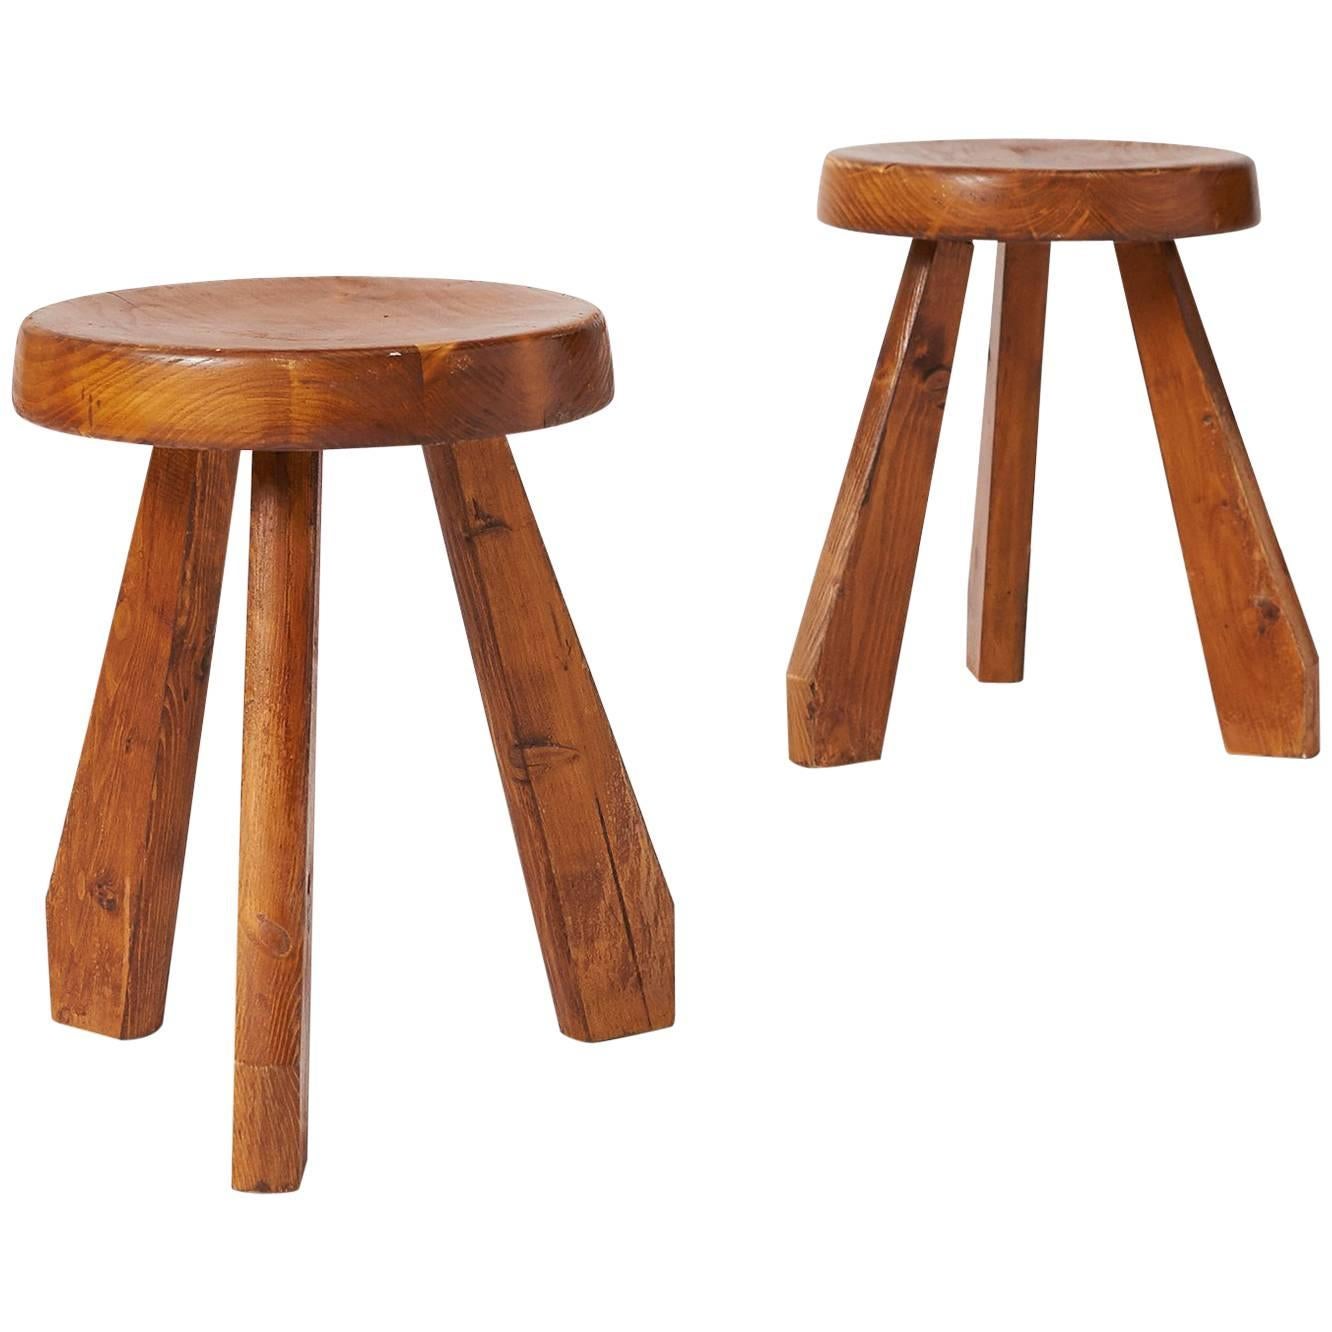 Pair of "Sandoz" Stools in Pine by Charlotte Perriand